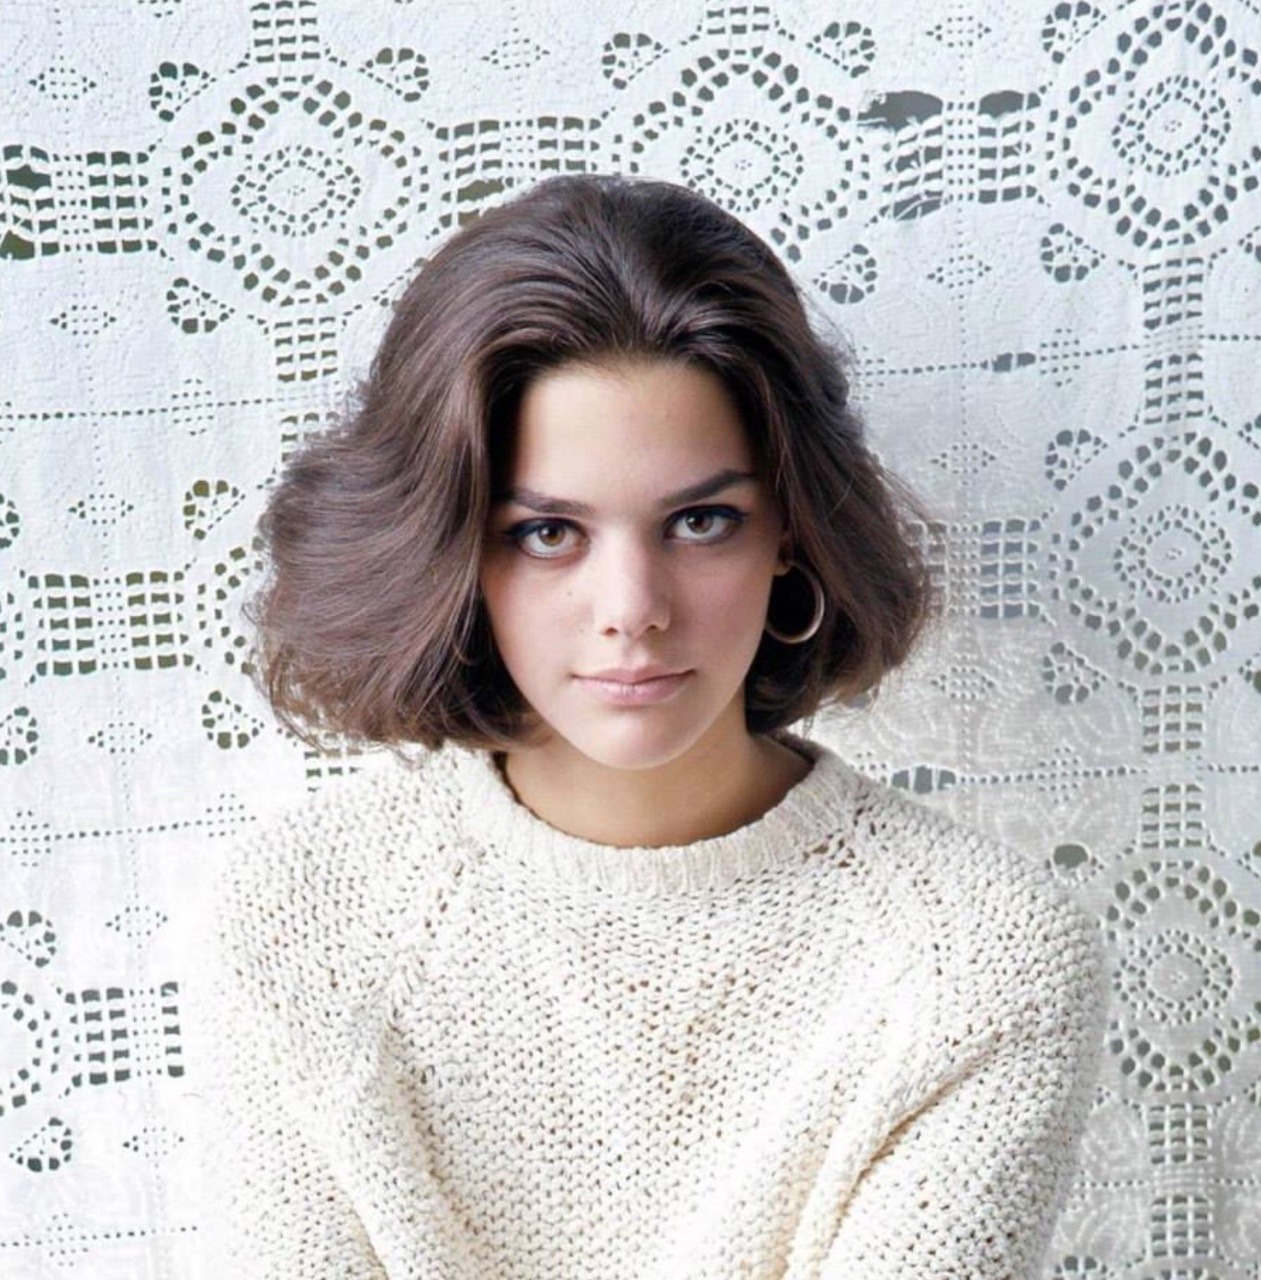 those-eyes-that-mouth:
“Tina Aumont by Milton H. Greene, 1965.
”